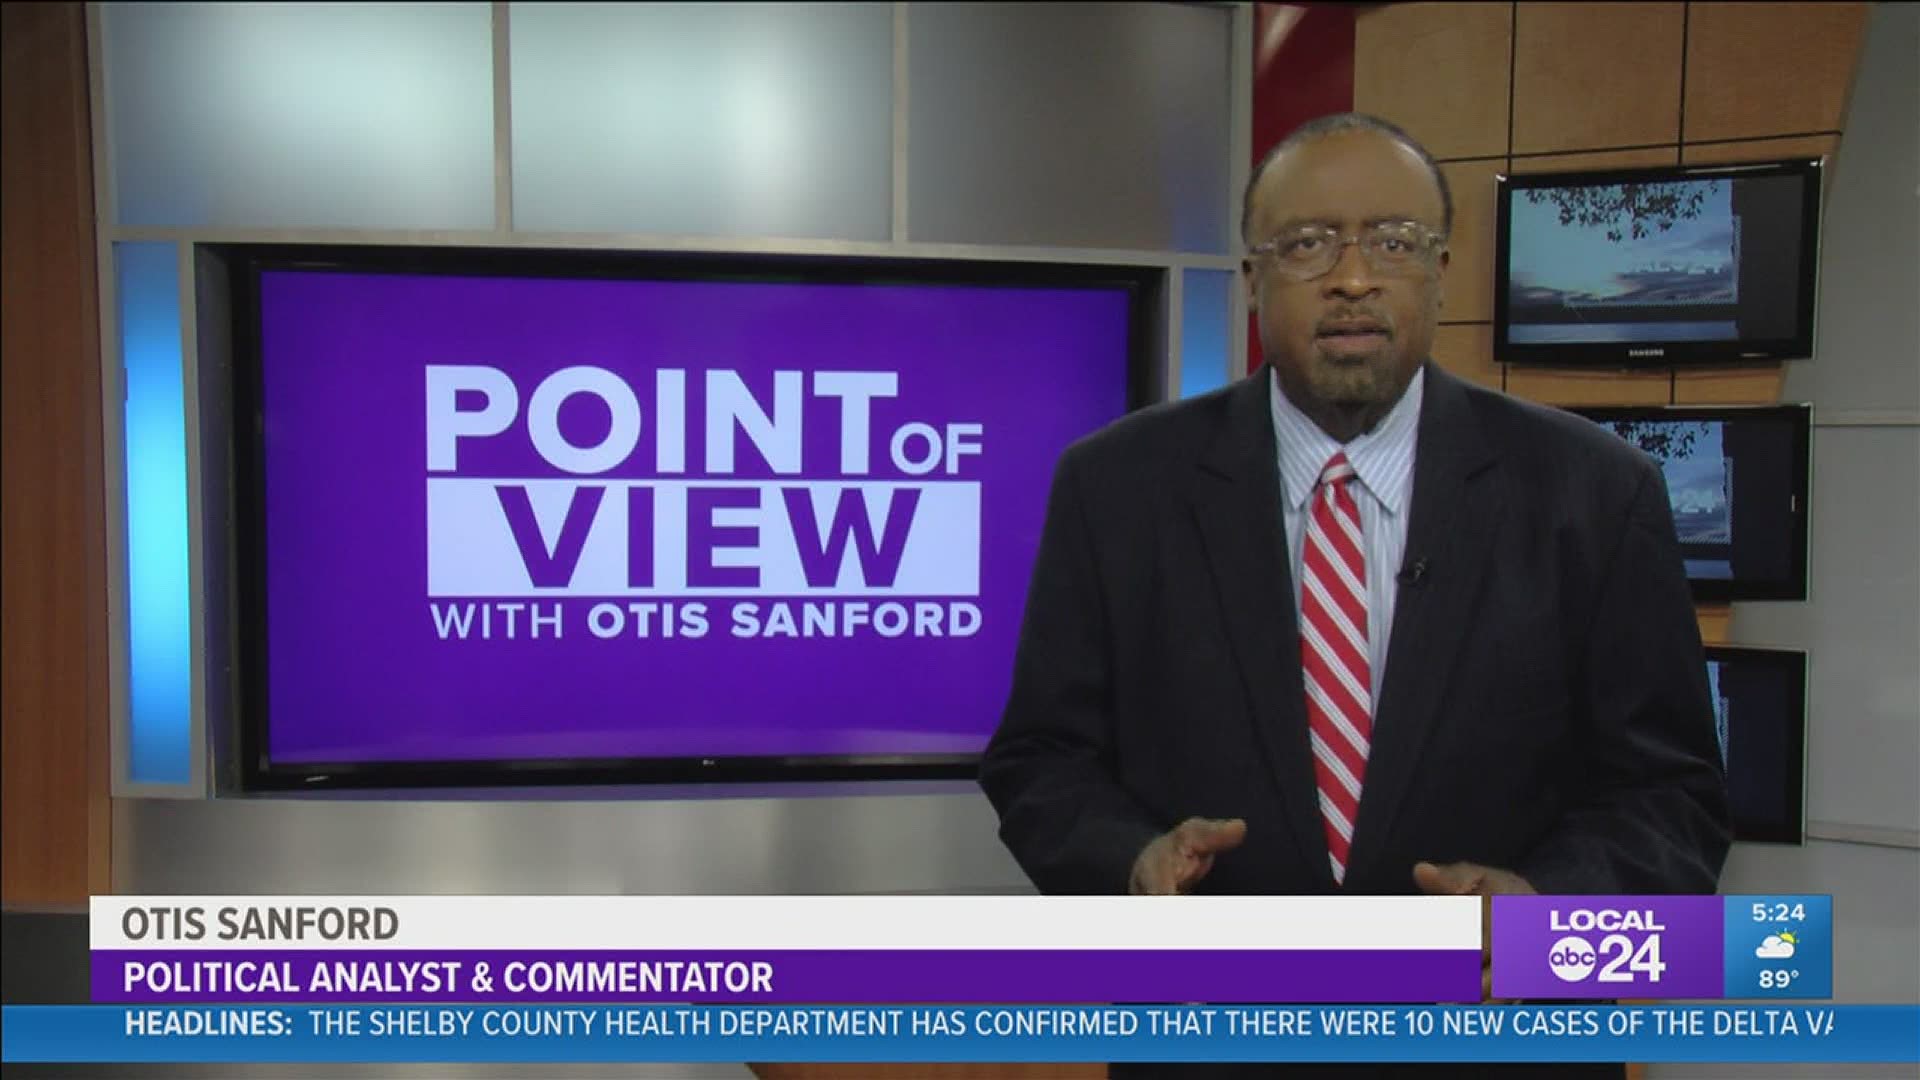 Local 24 News political analyst and commentator Otis Sanford shares his point of view on councilman Martavius Jones being behind on property taxes.